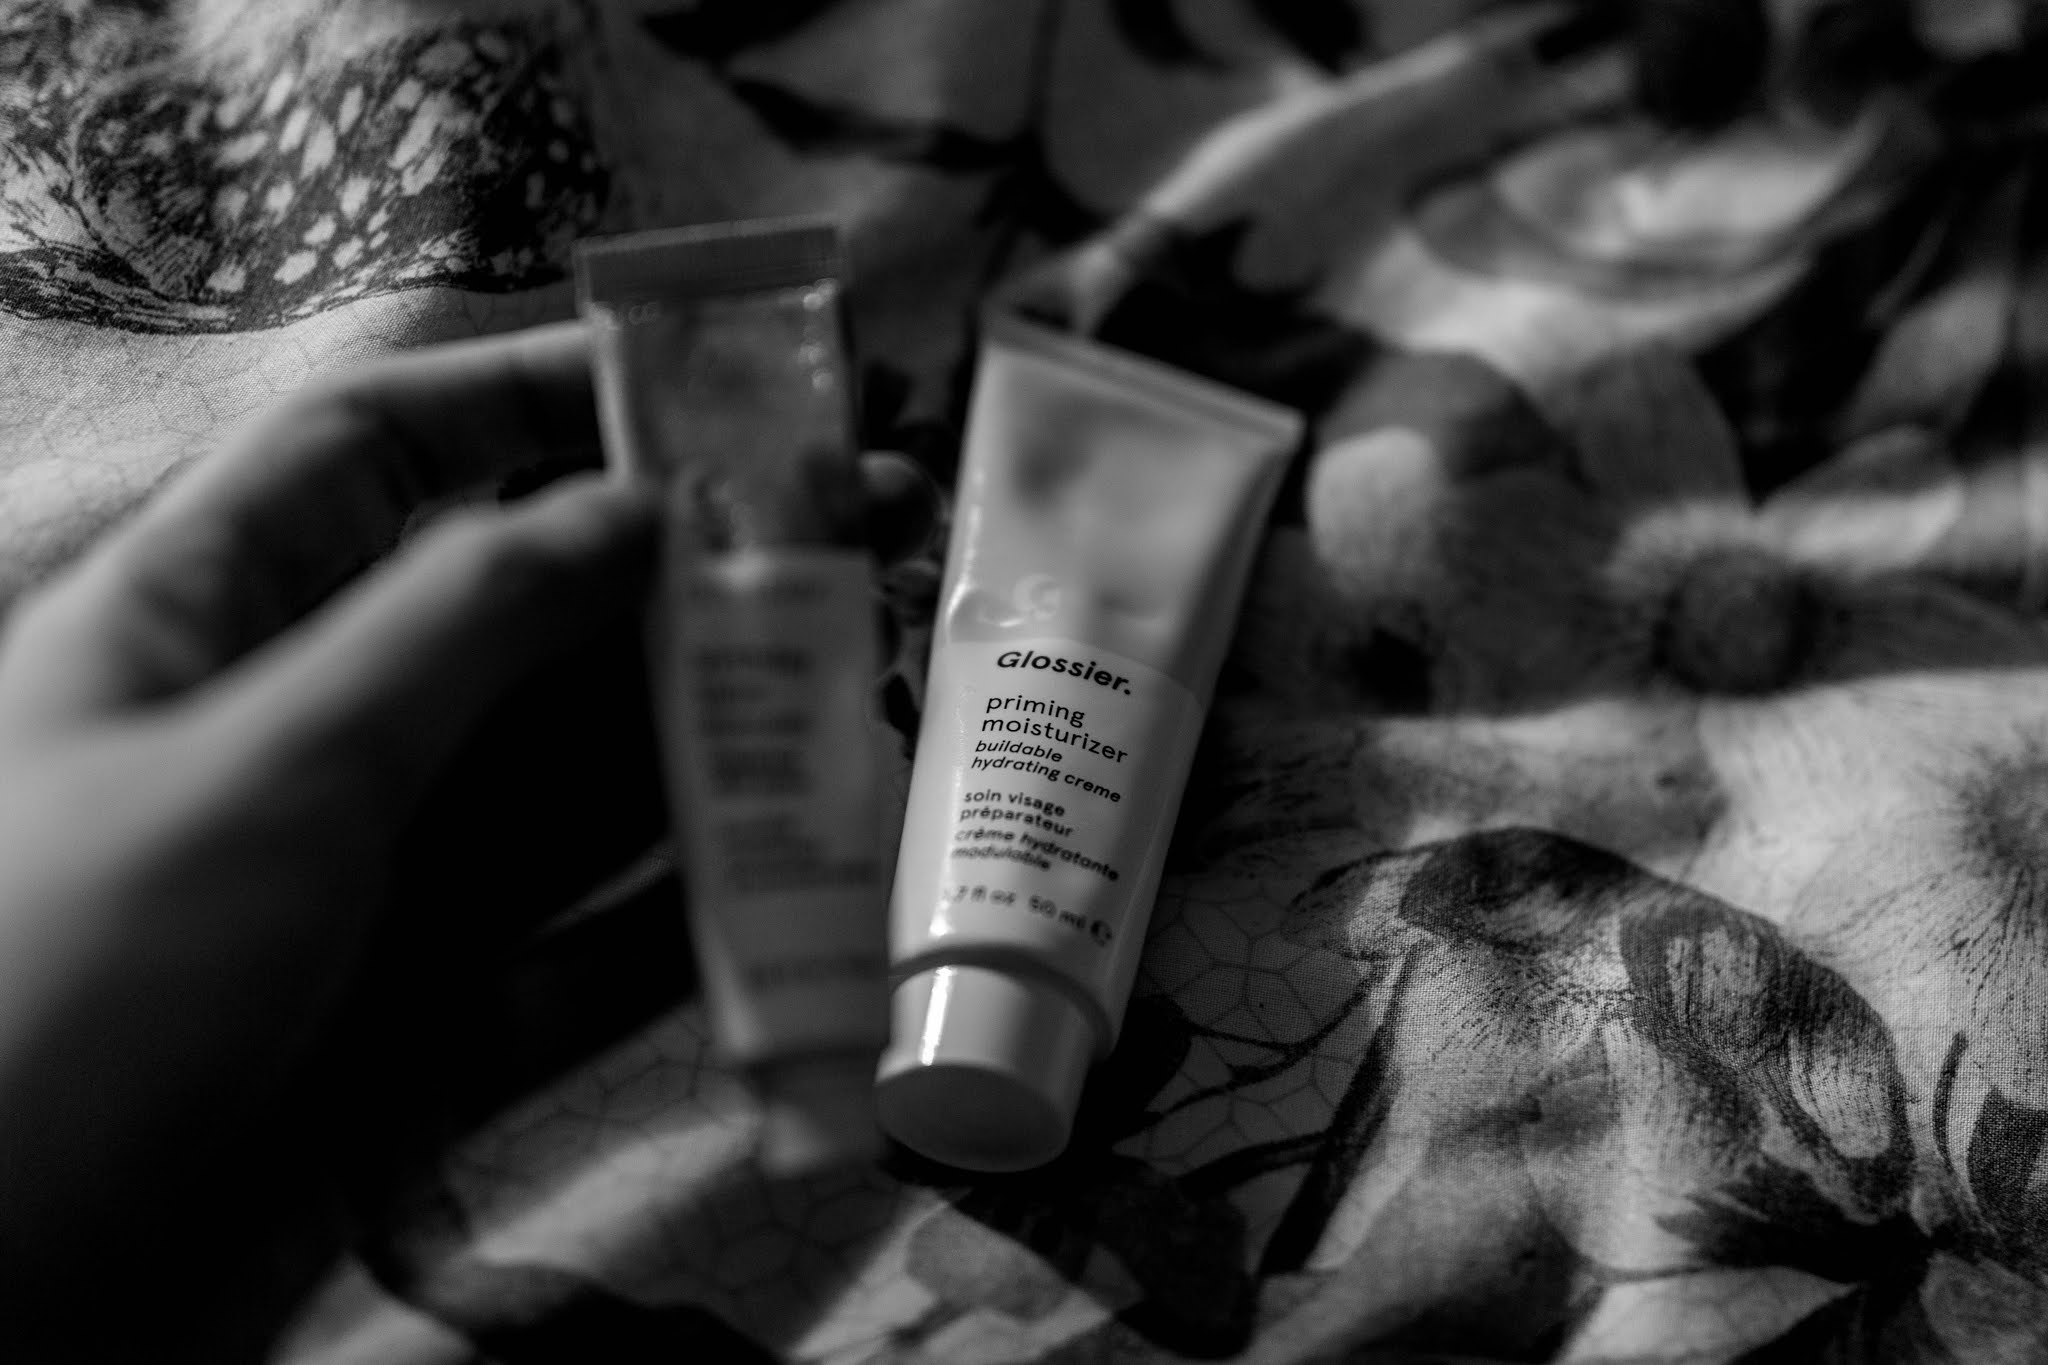 black and white photos of glossier beauty products on floral bedding